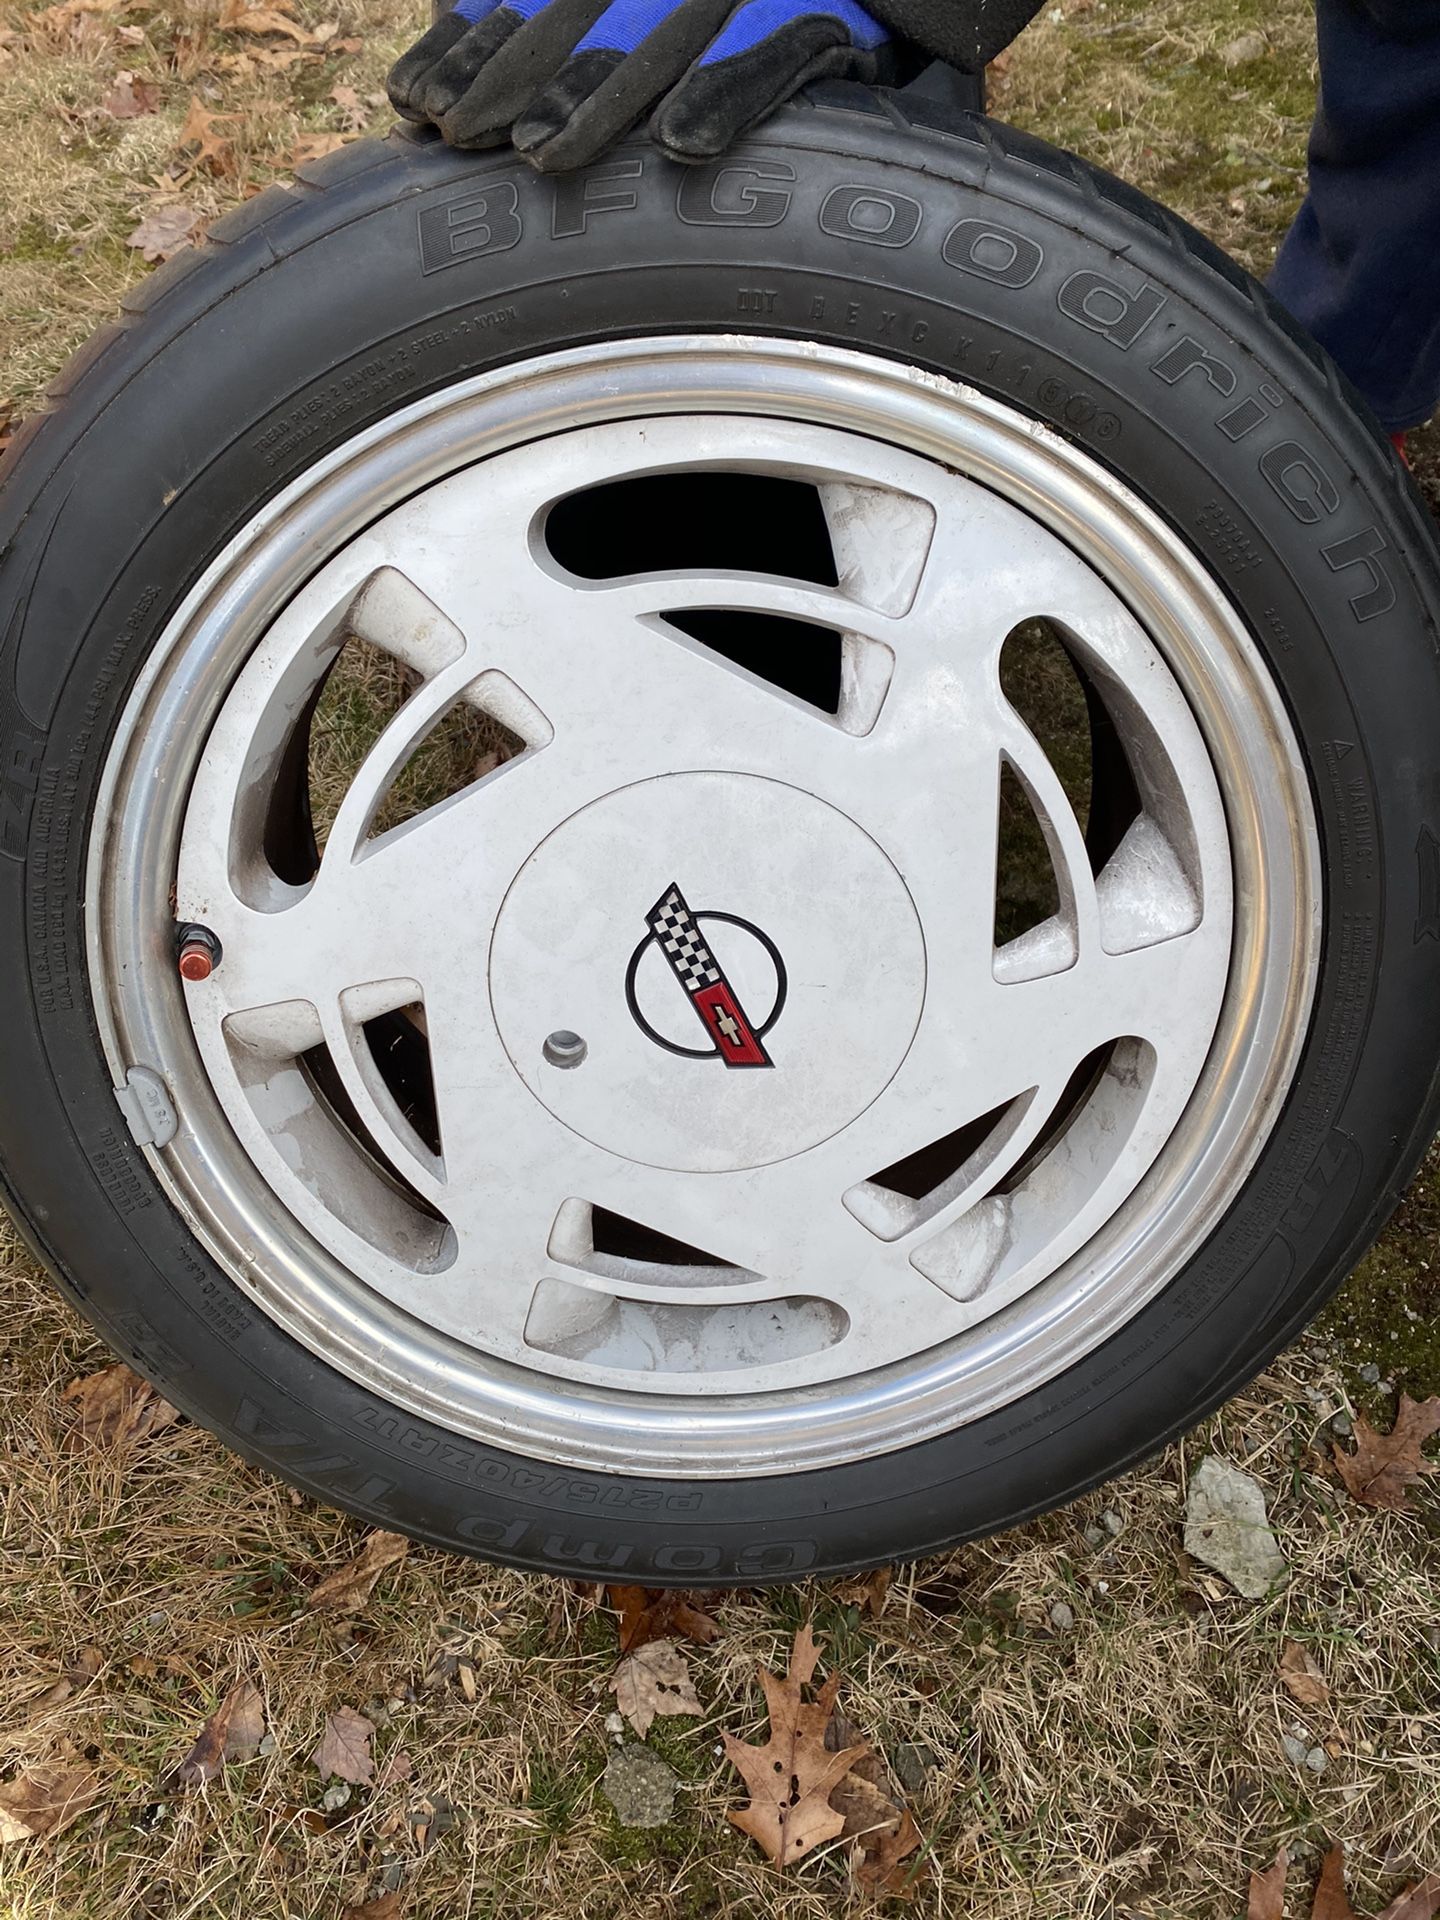 1988 Chevy Corvette anniversary wheels and tires